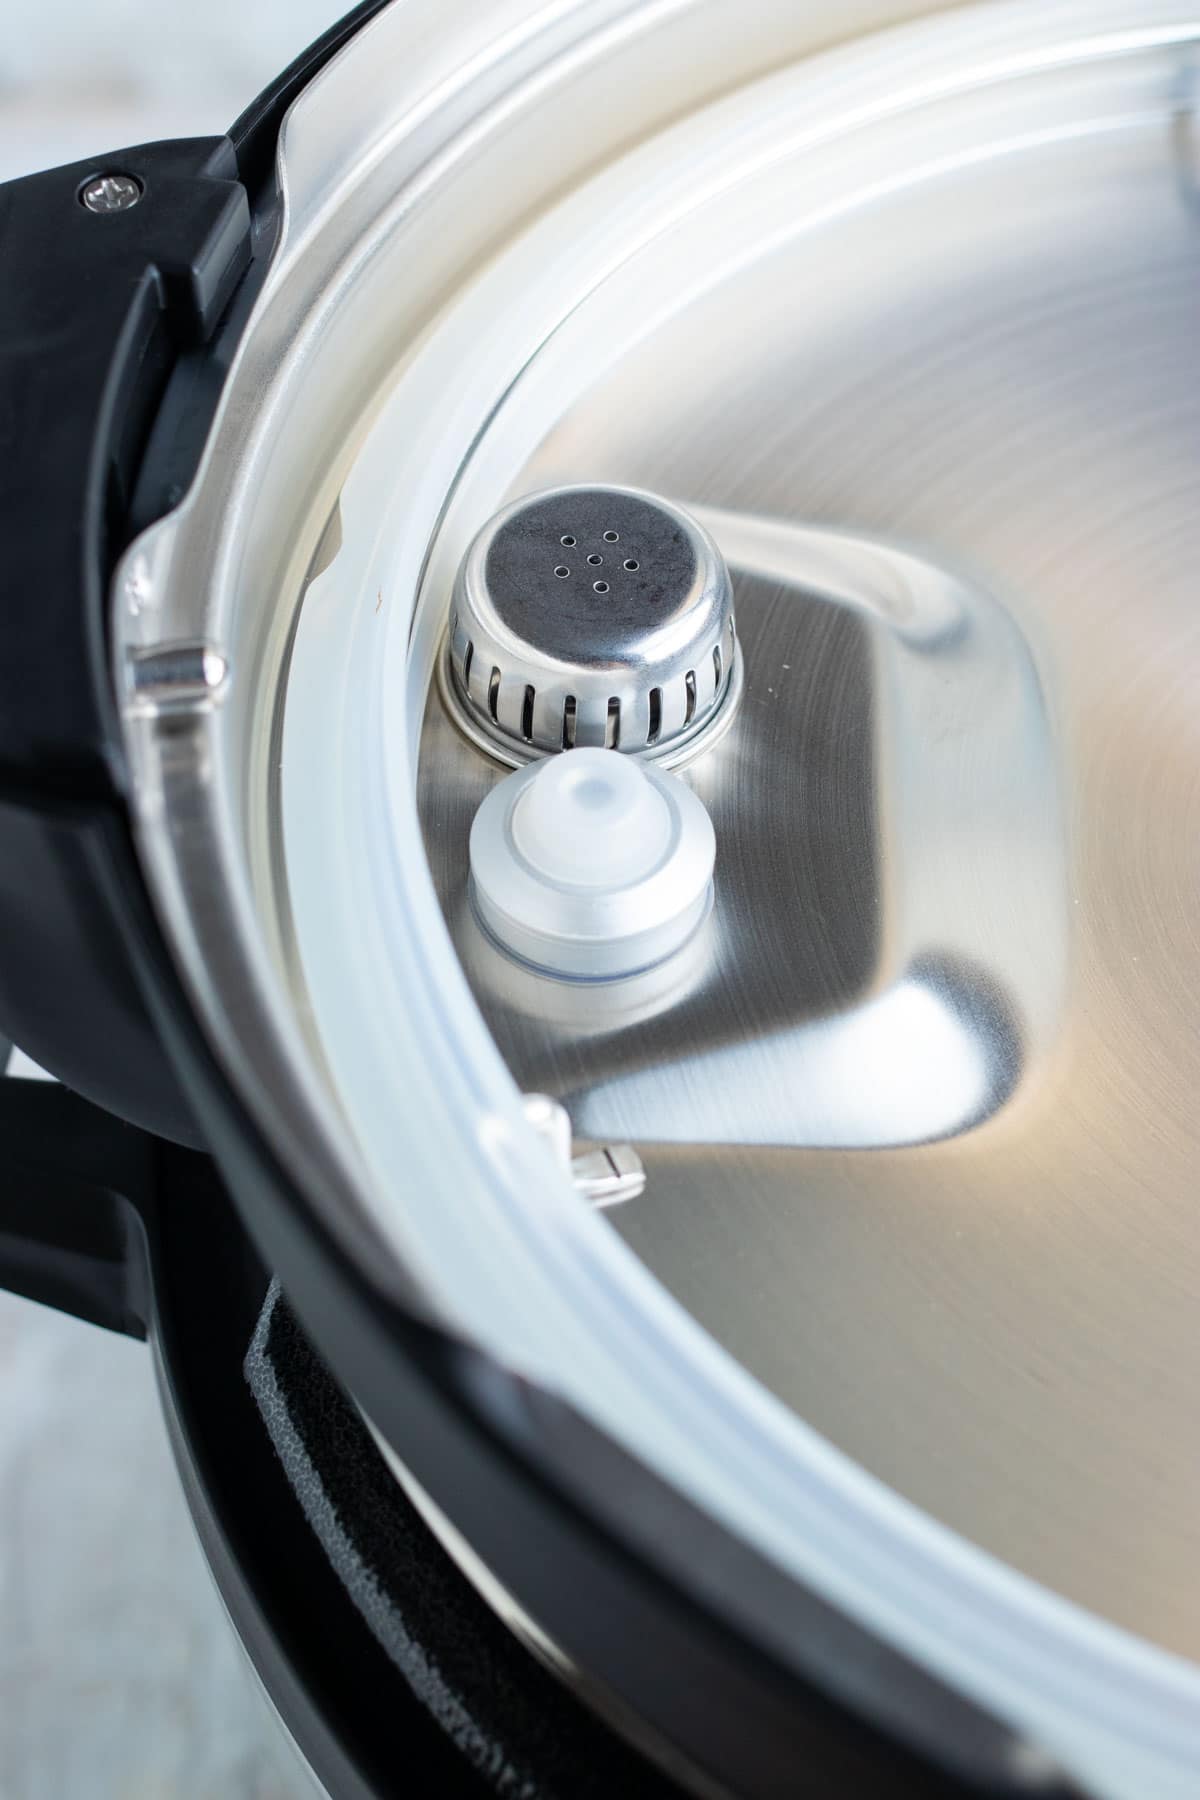 An image showing the anti-block shield of a pressure cooker.